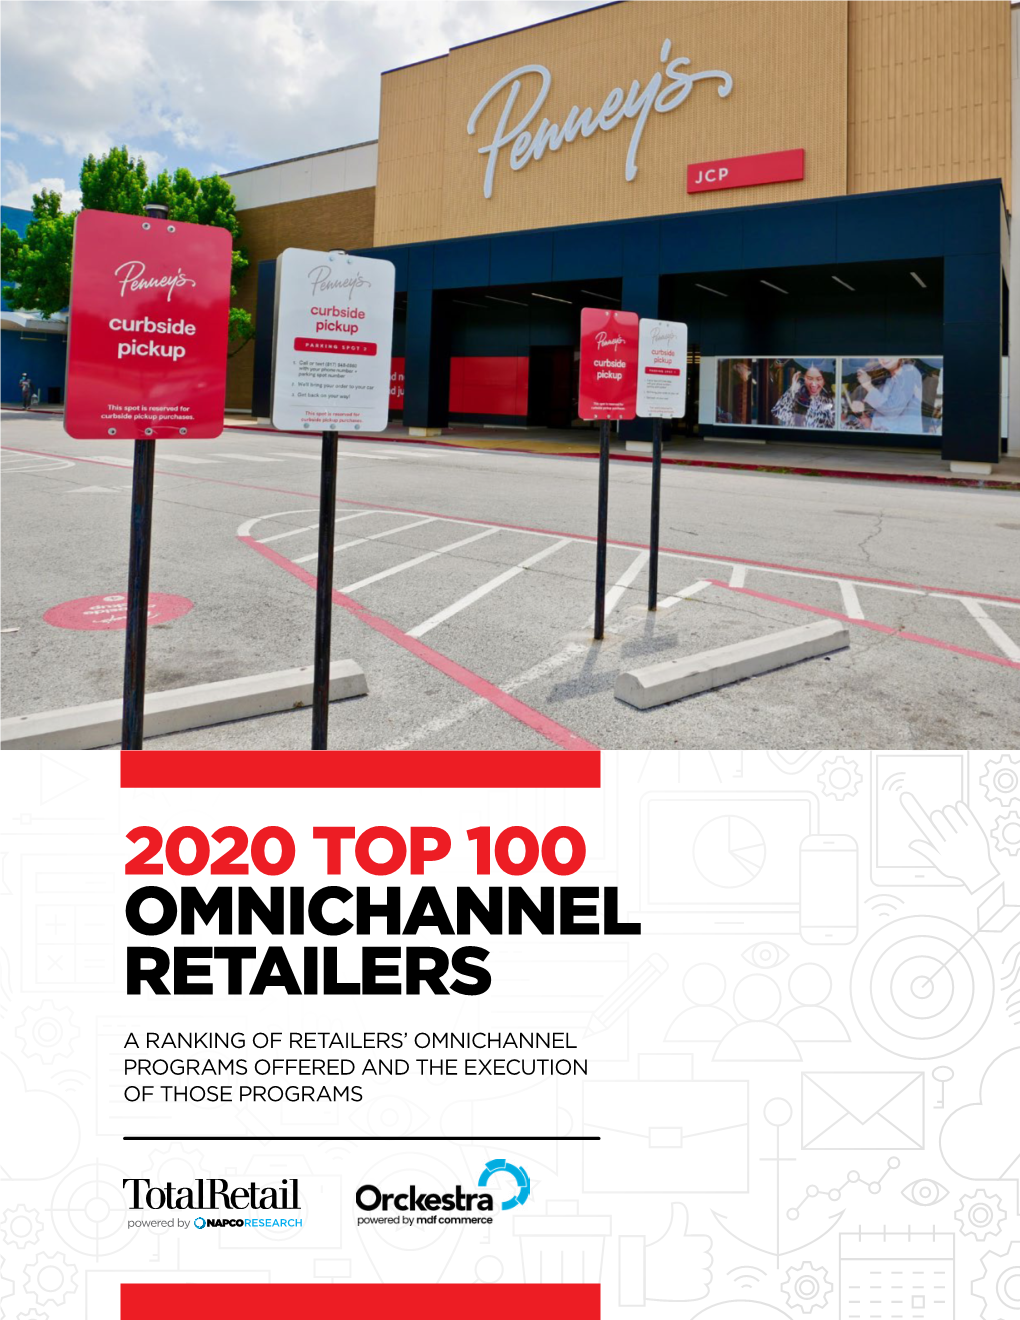 2020 Top 100 Omnichannel Retailers a Ranking of Retailers’ Omnichannel Programs Offered and the Execution of Those Programs